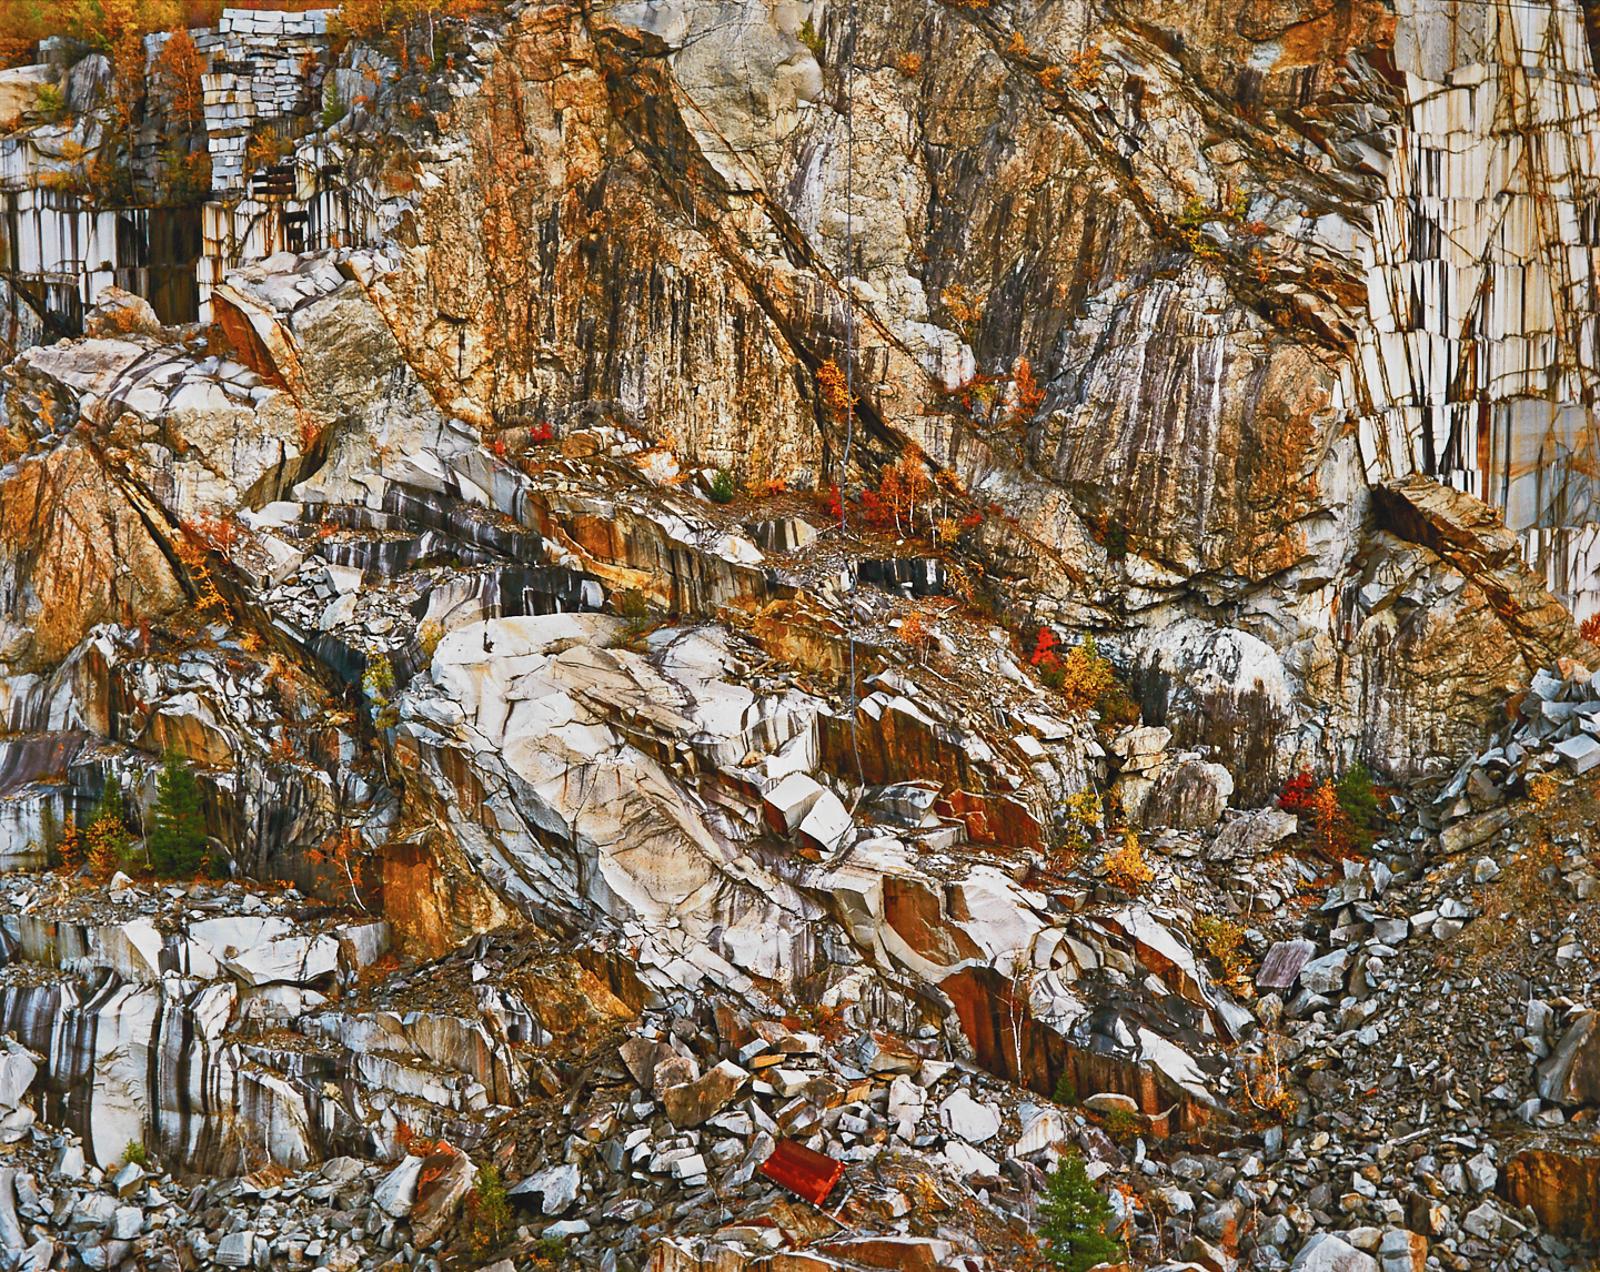 Edward Burtynsky (1955) - Rock Of Ages #6, Abandoned Granite Quarry, Rock Of Ages Quarry, Barre, Vermont, Usa, 1991